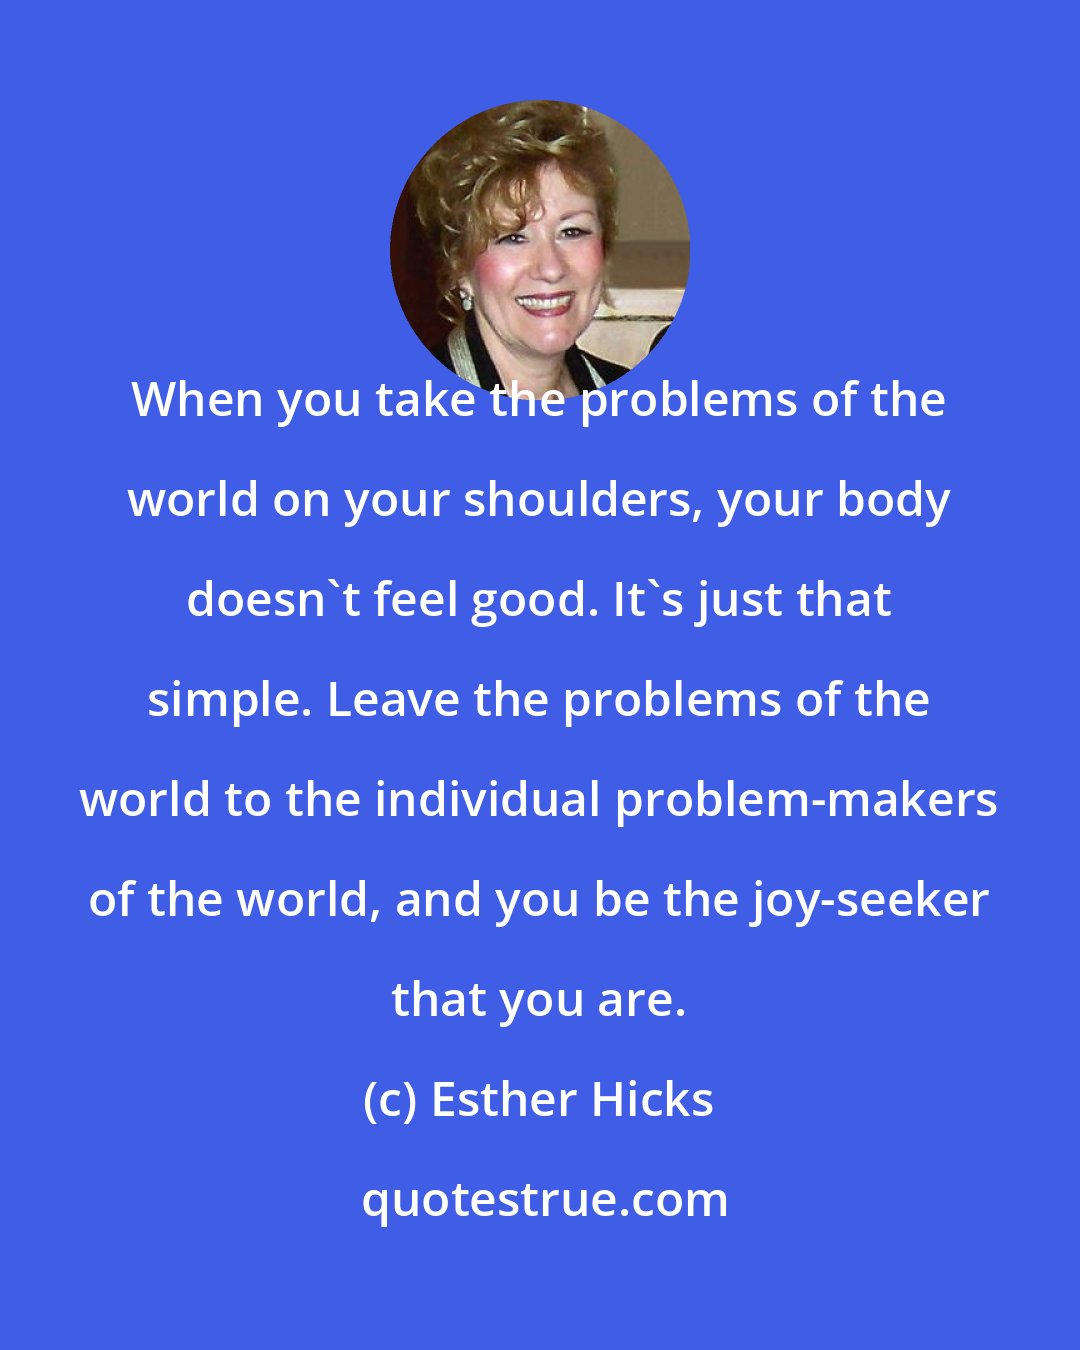 Esther Hicks: When you take the problems of the world on your shoulders, your body doesn't feel good. It's just that simple. Leave the problems of the world to the individual problem-makers of the world, and you be the joy-seeker that you are.